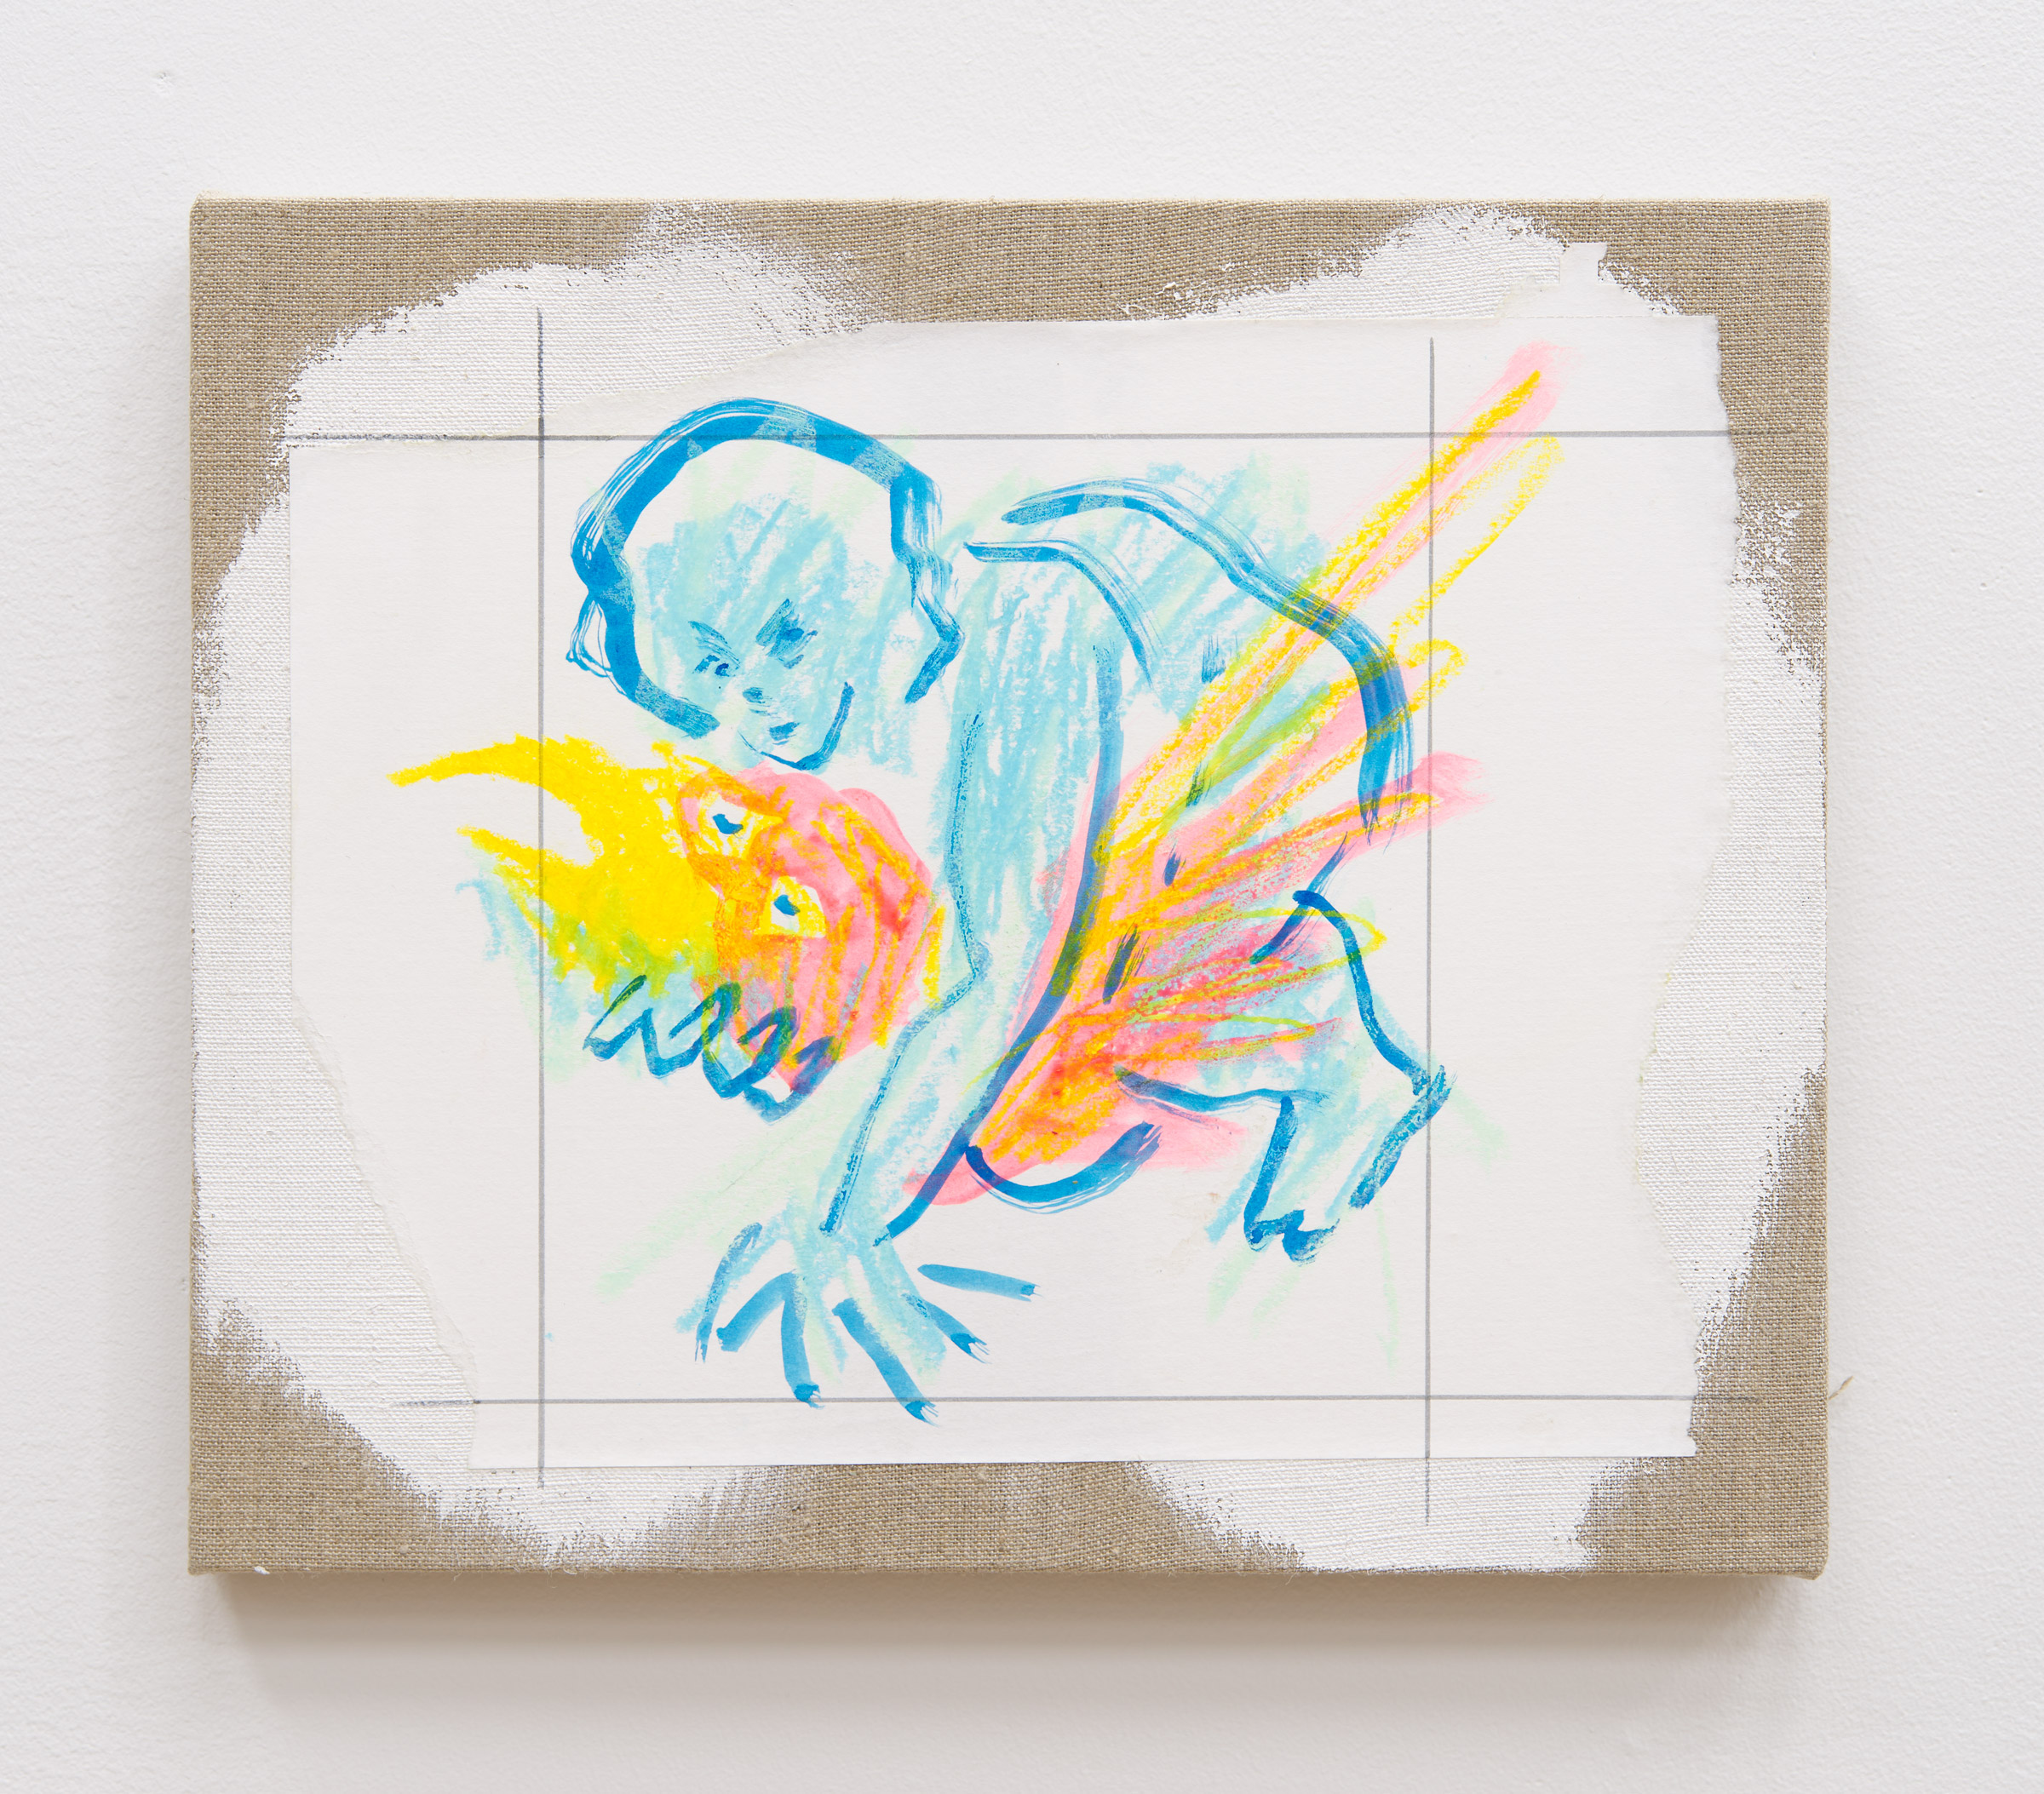 Daniel Boccato, parrotpainting, 2022, Acrylic paint, felt tip marker, gesso, ink, linen, oil pastel, paper, pva adhesive, wood, 11 x 13 x 1 in.